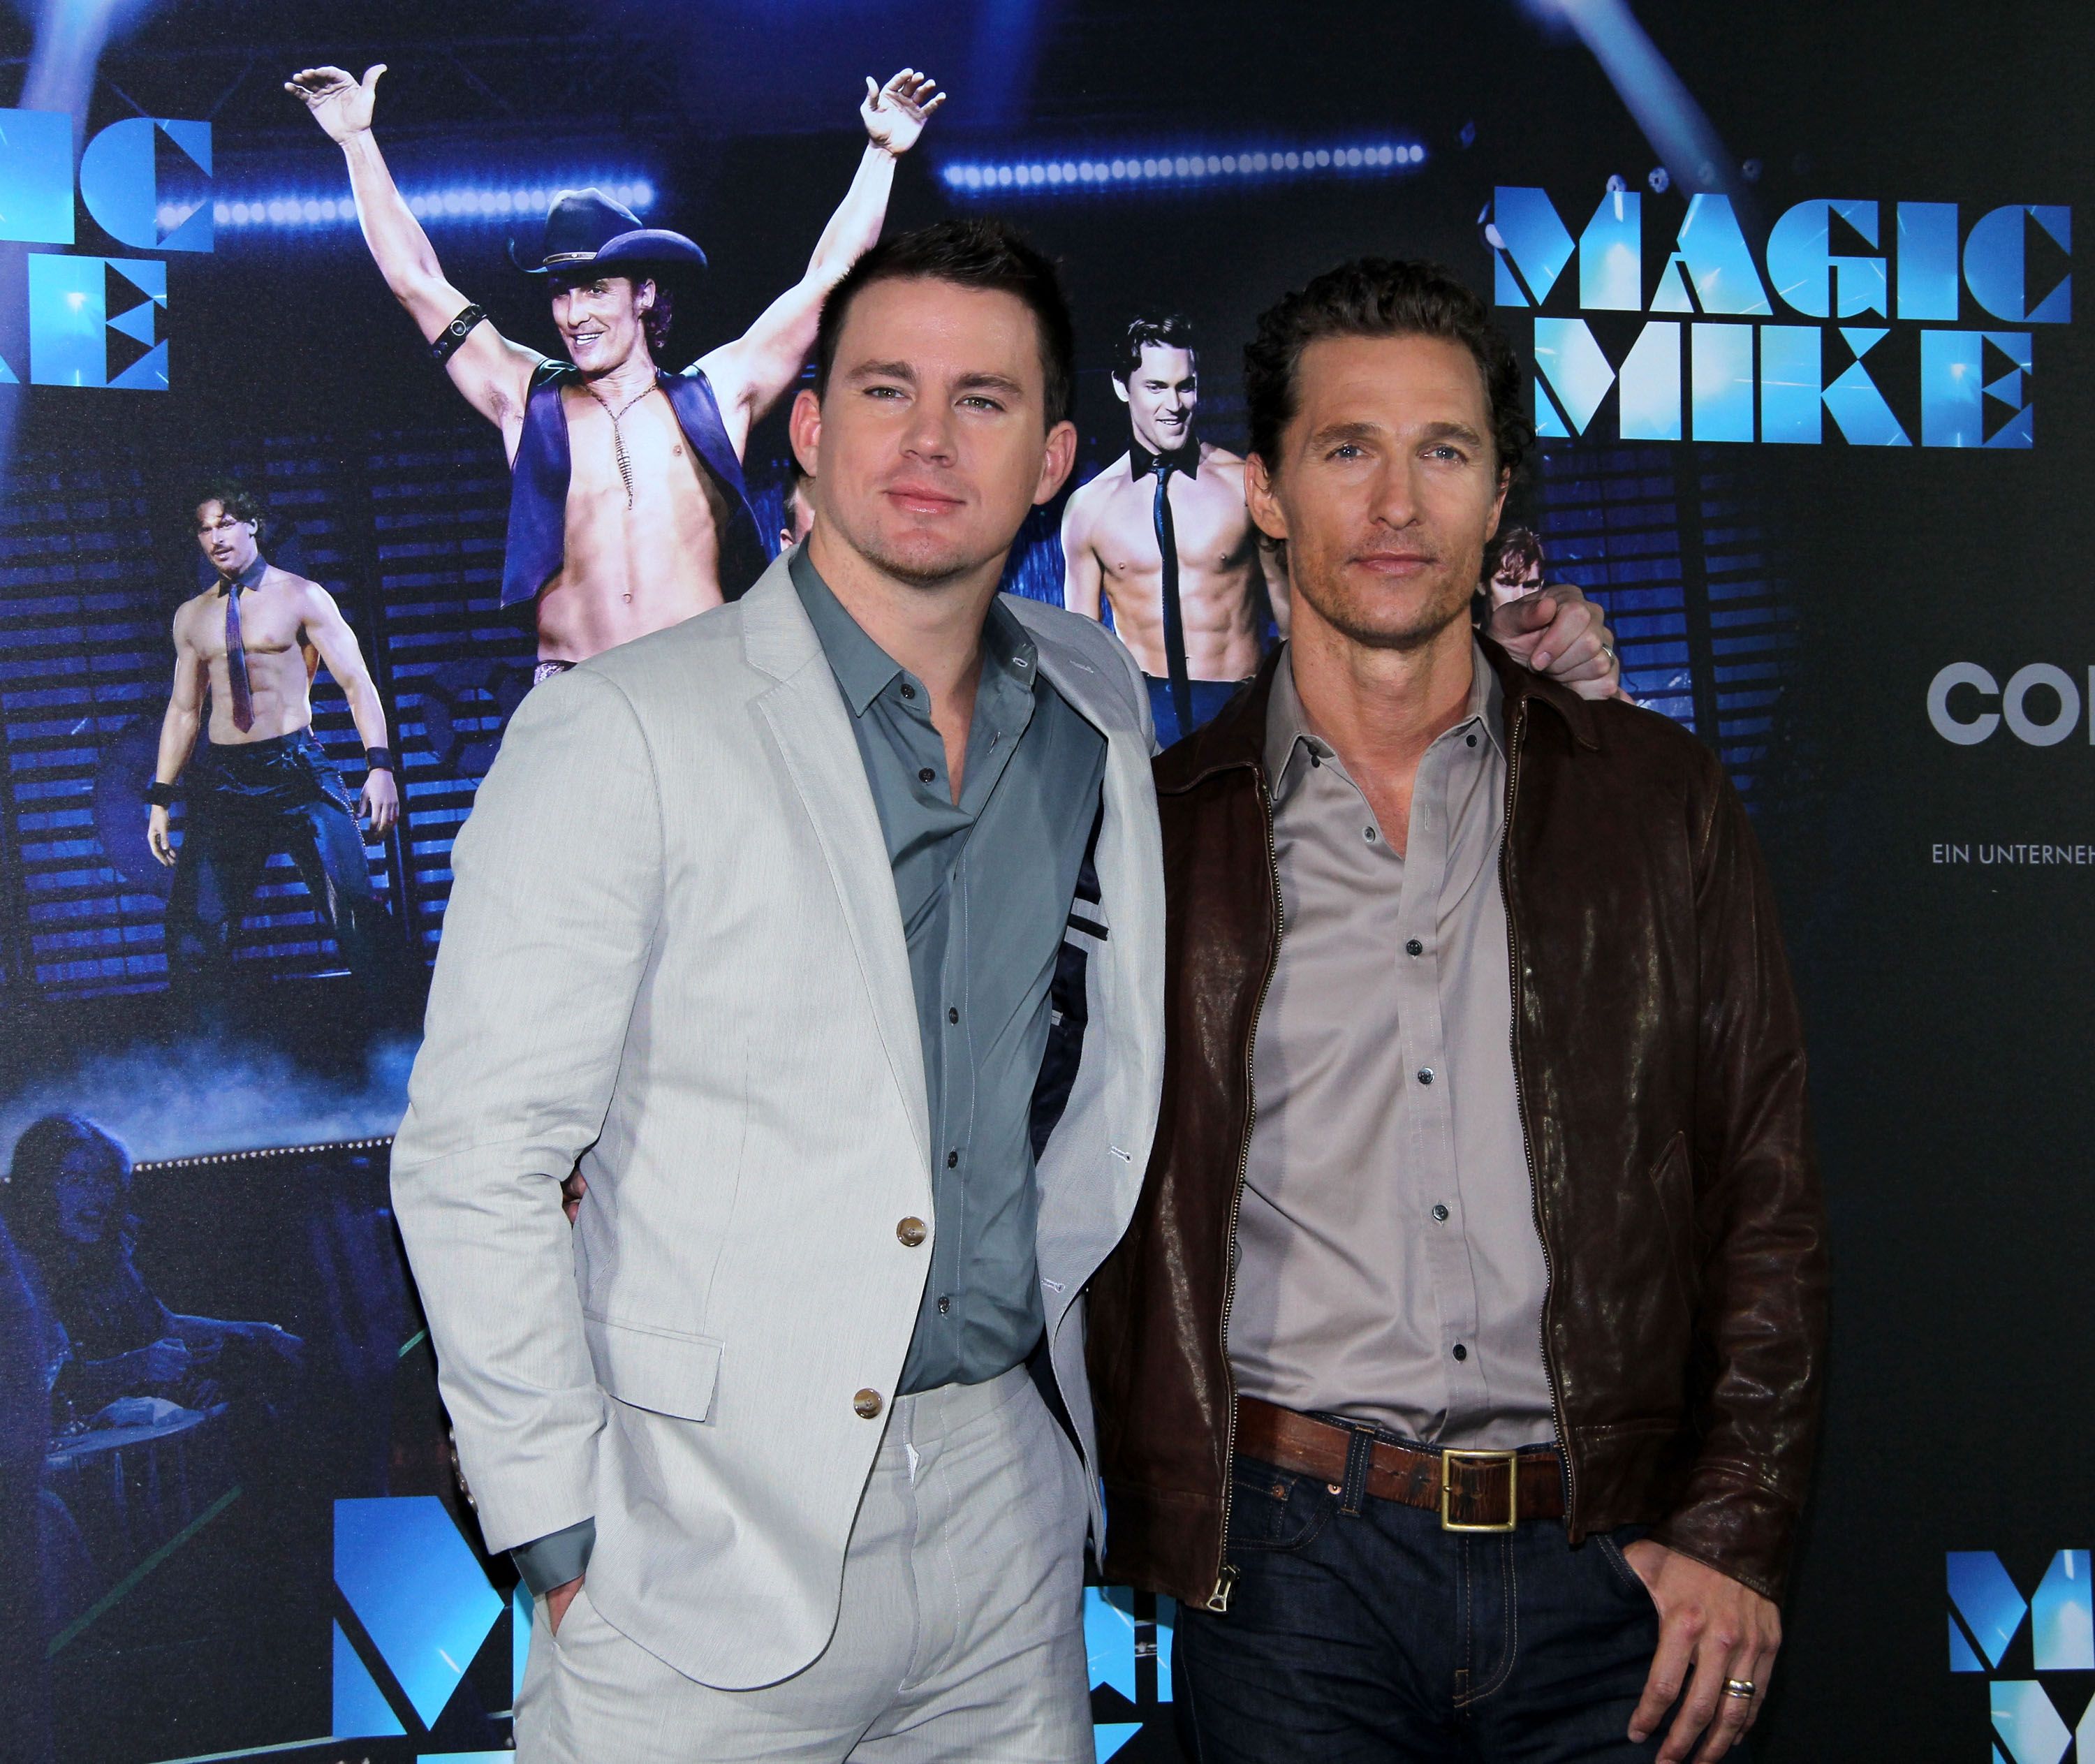 Magic Mike Sex Party - Magic Mike 3: Release Date, Spoilers, Cast, Trailer And Plot